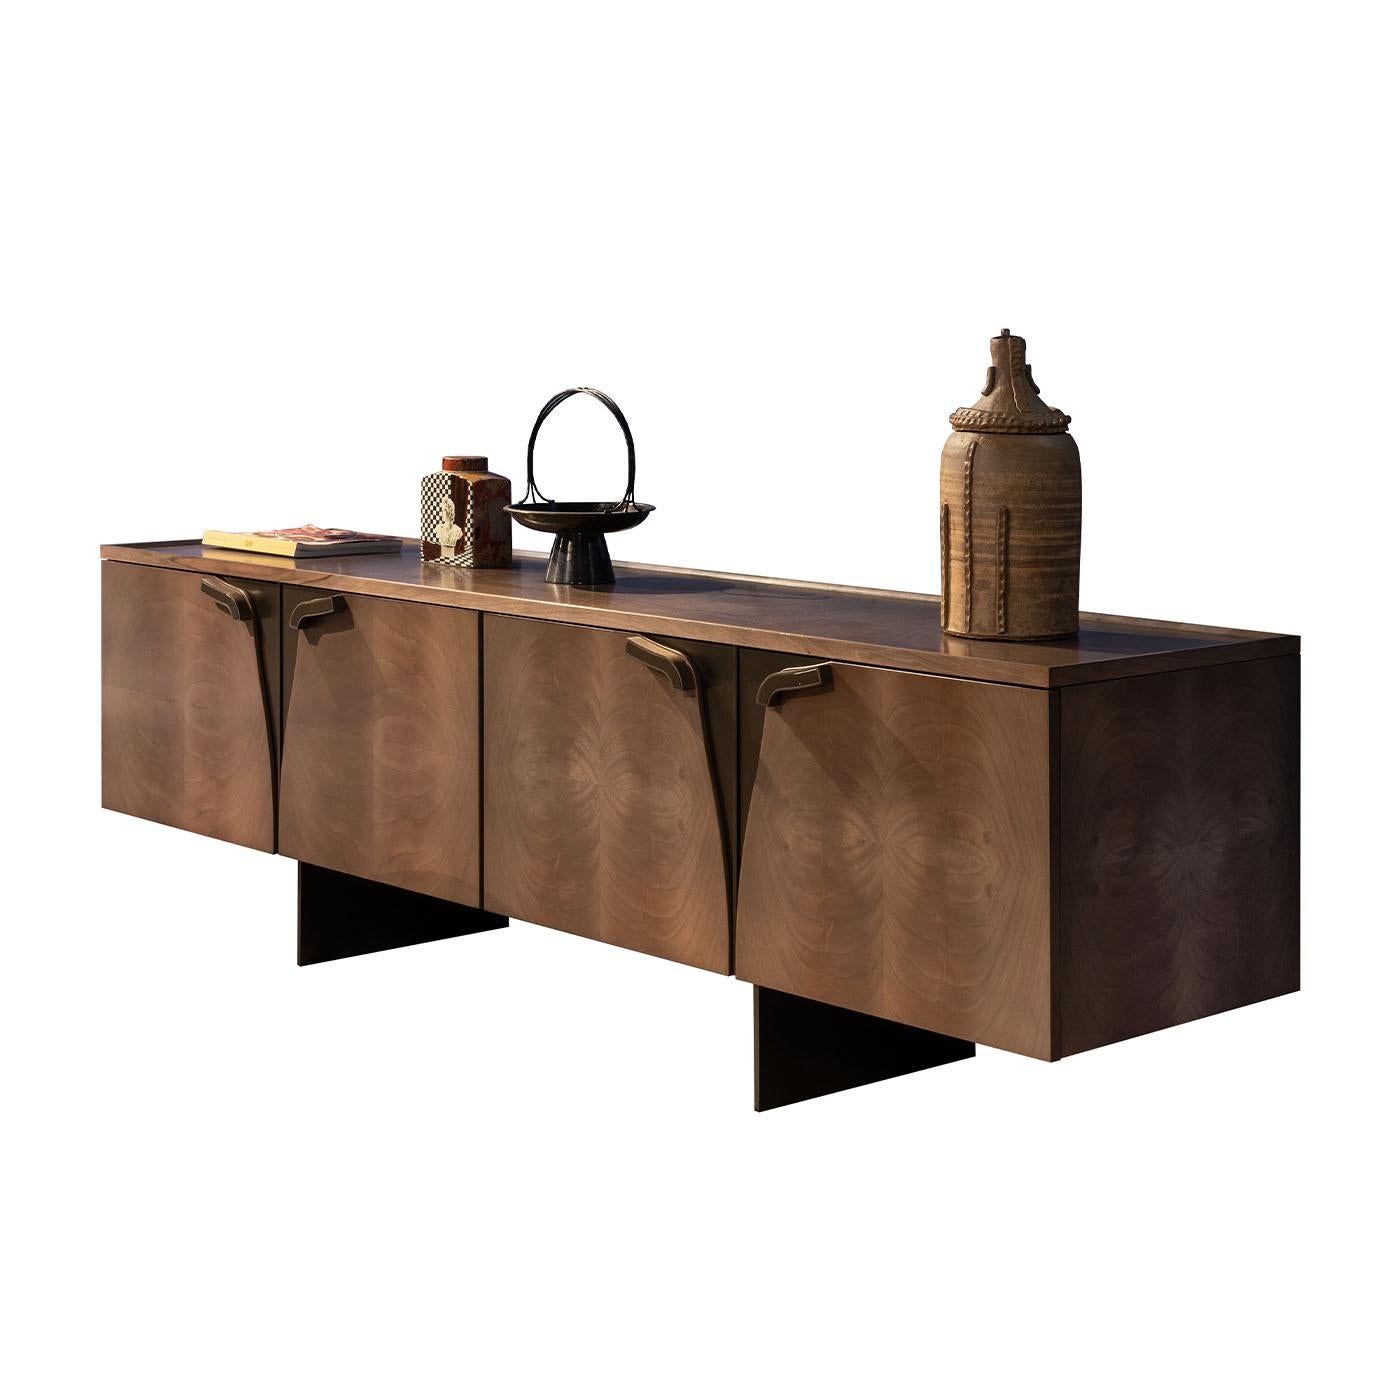 Fluid-lined metal details with a bronze finish interrupt the luxurious uniqueness of this imposing sideboard in prized feathered walnut. Minimalist legs confirm the essential character immediately conveyed through the rigorously sculpted profiles,